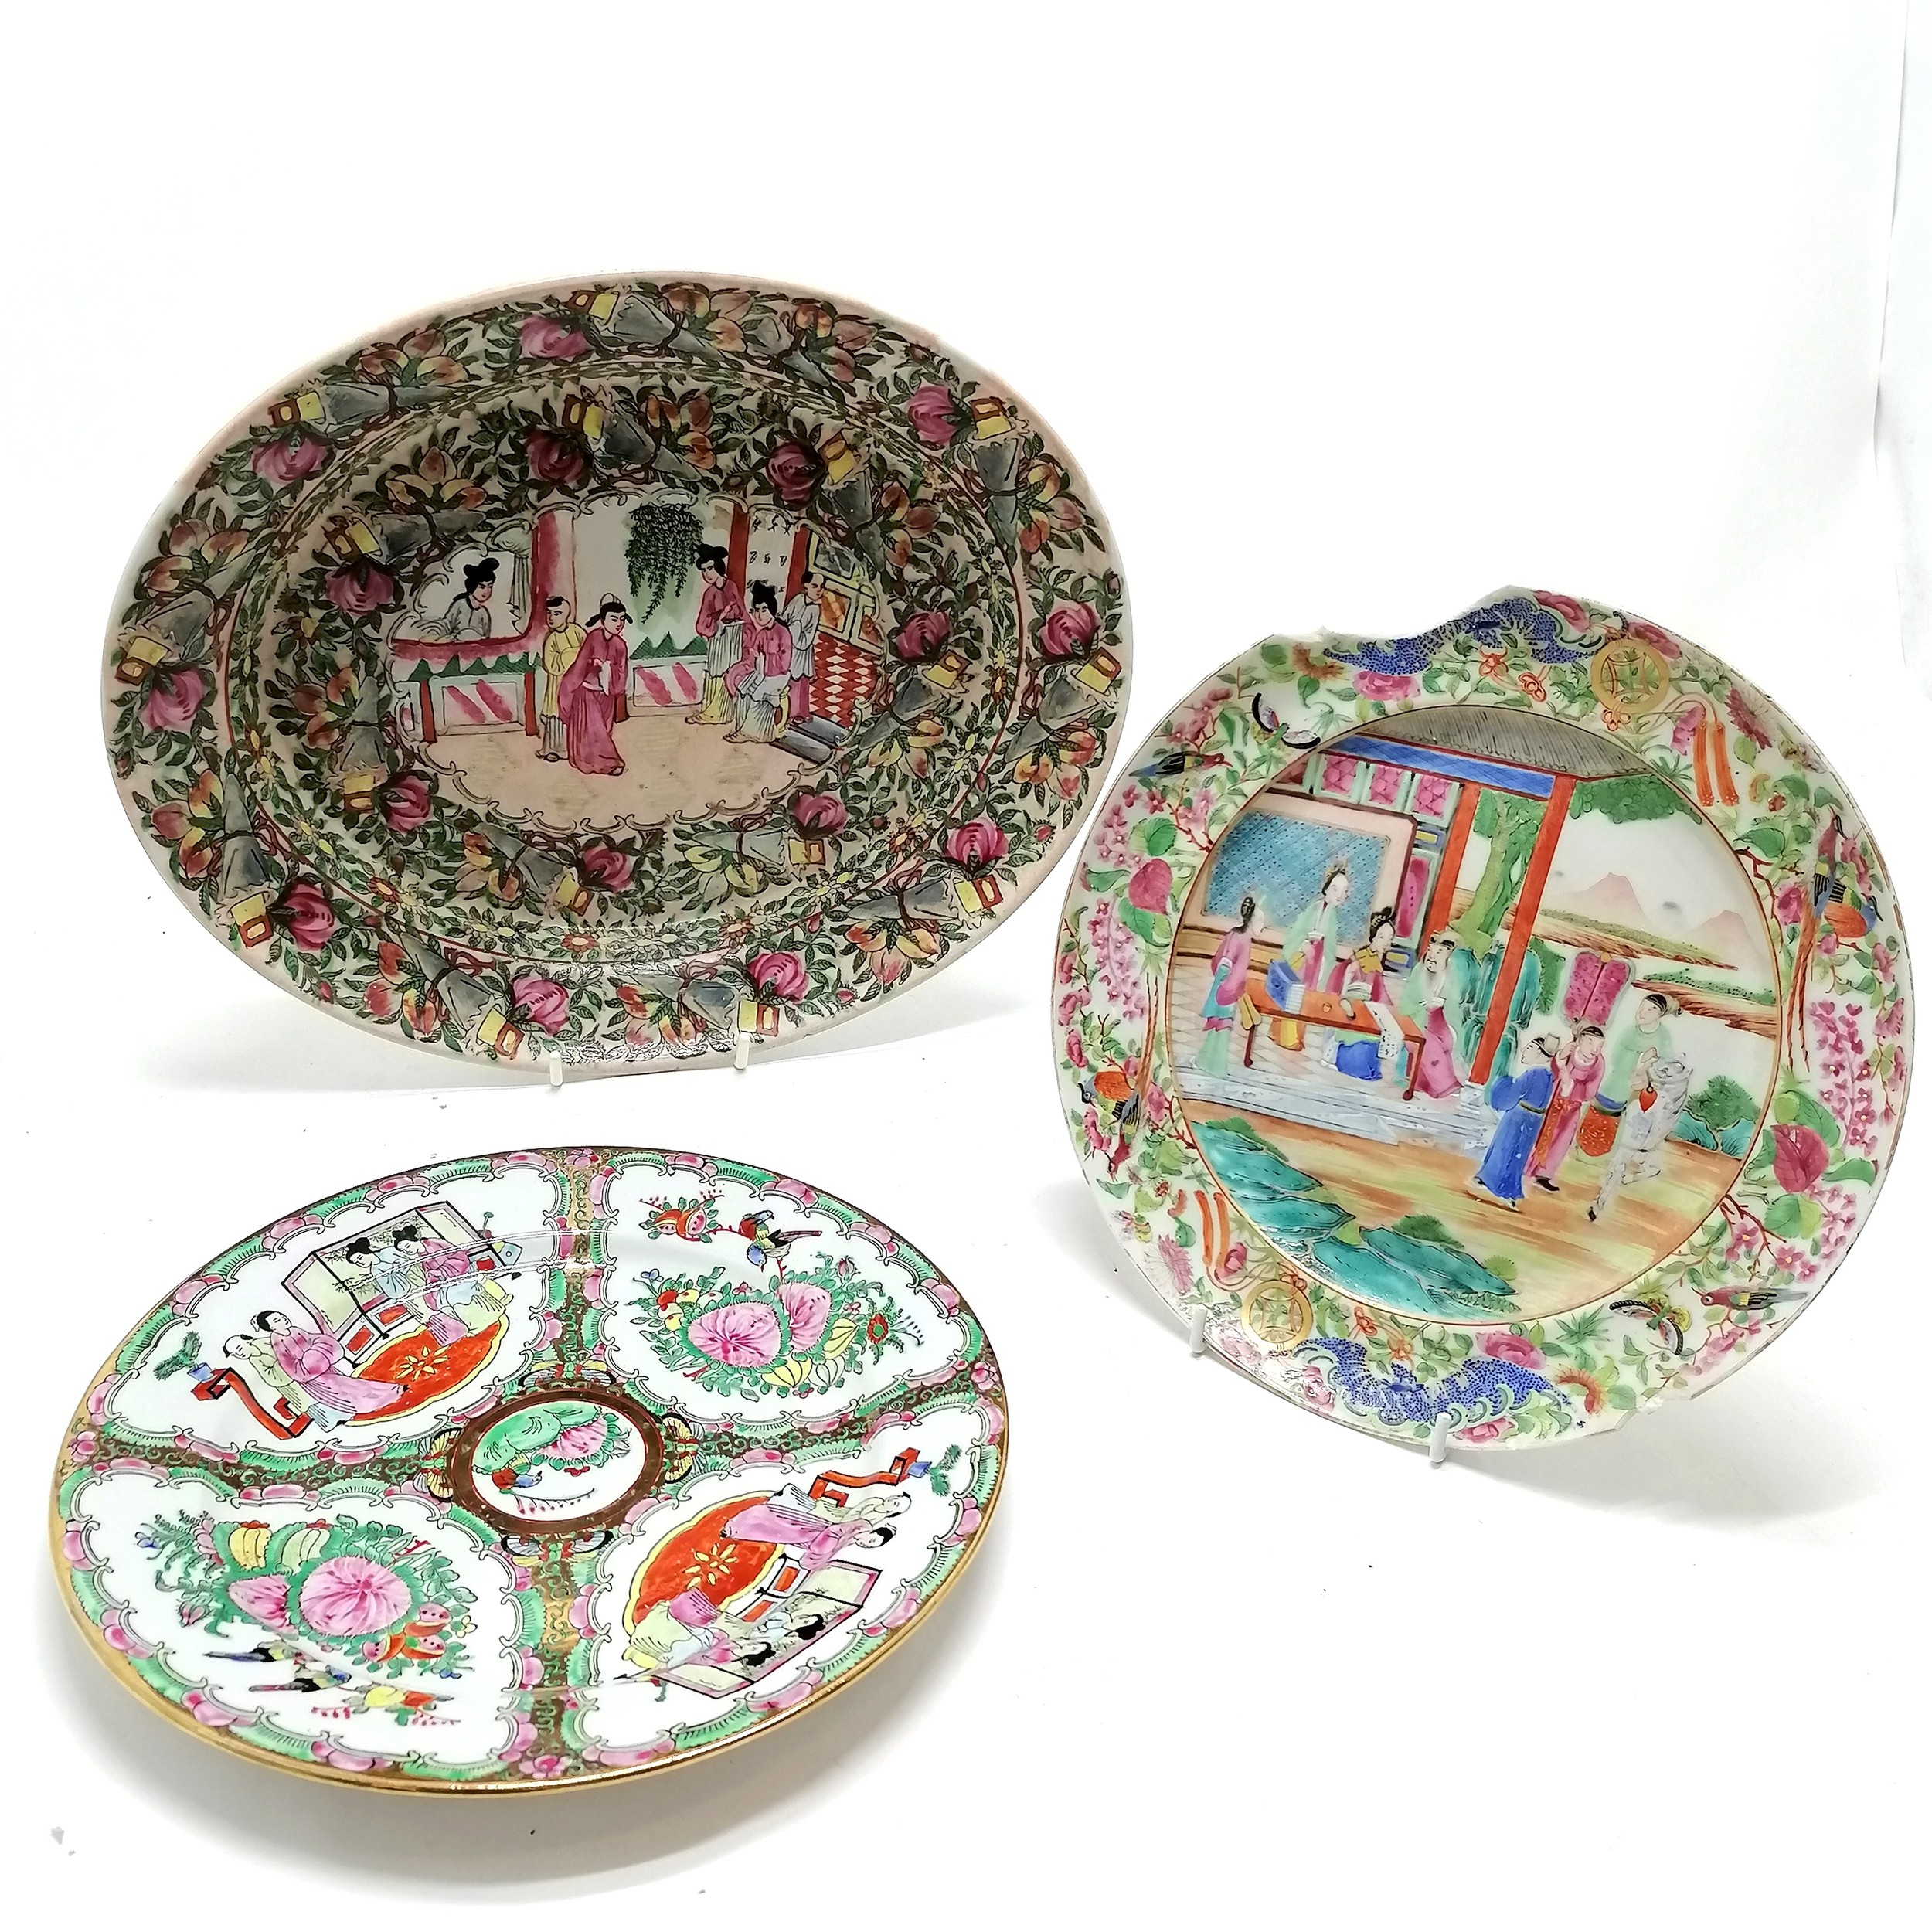 Antique Chinese/ Cantonese hand painted plate 25.5cm diameter has obvious loses T/W an oval hand